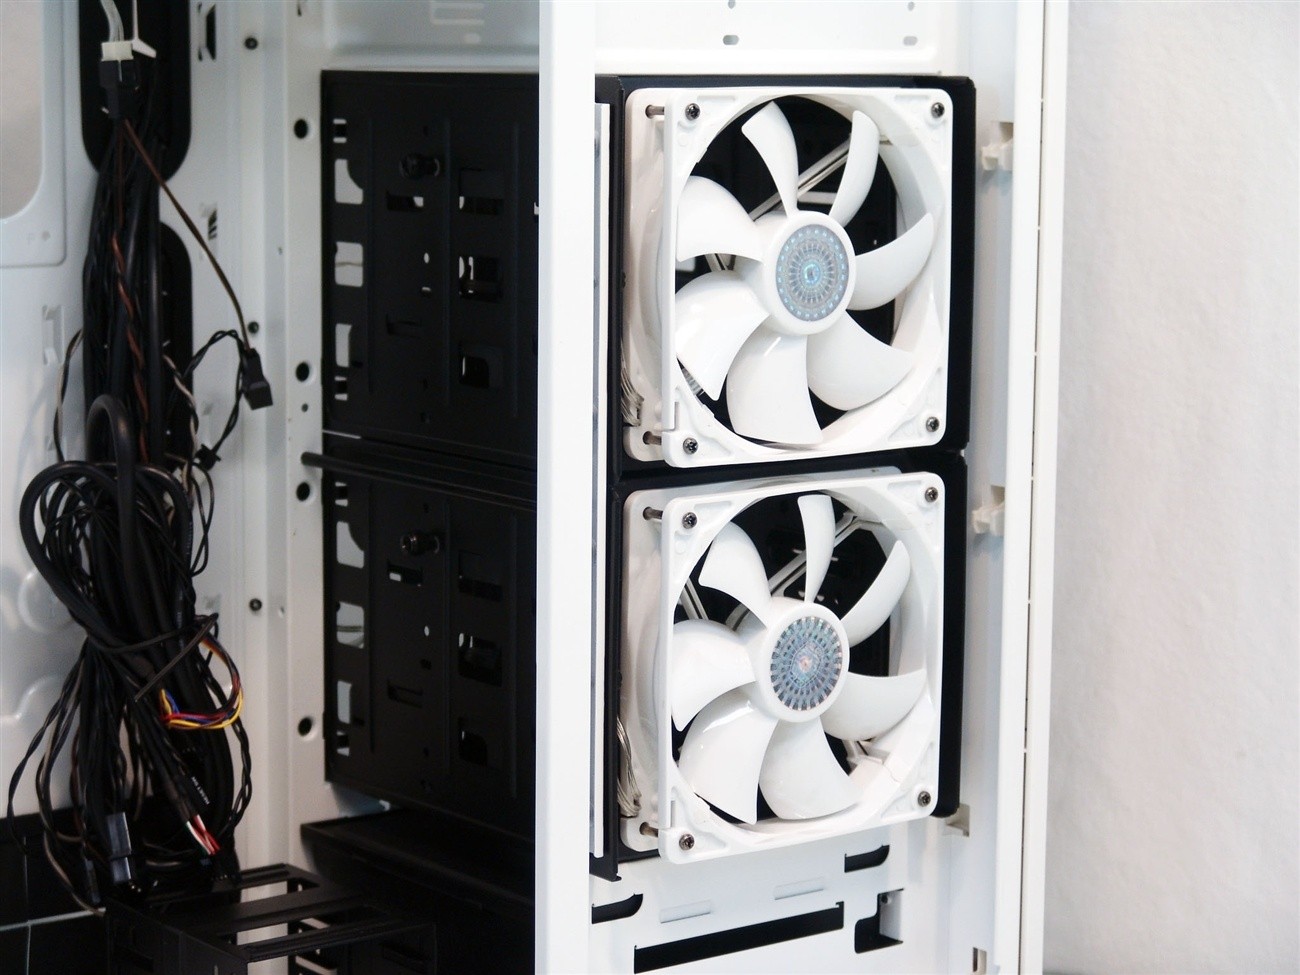 where-can-put-the-cpu-cooler-in-a-storm-stykker